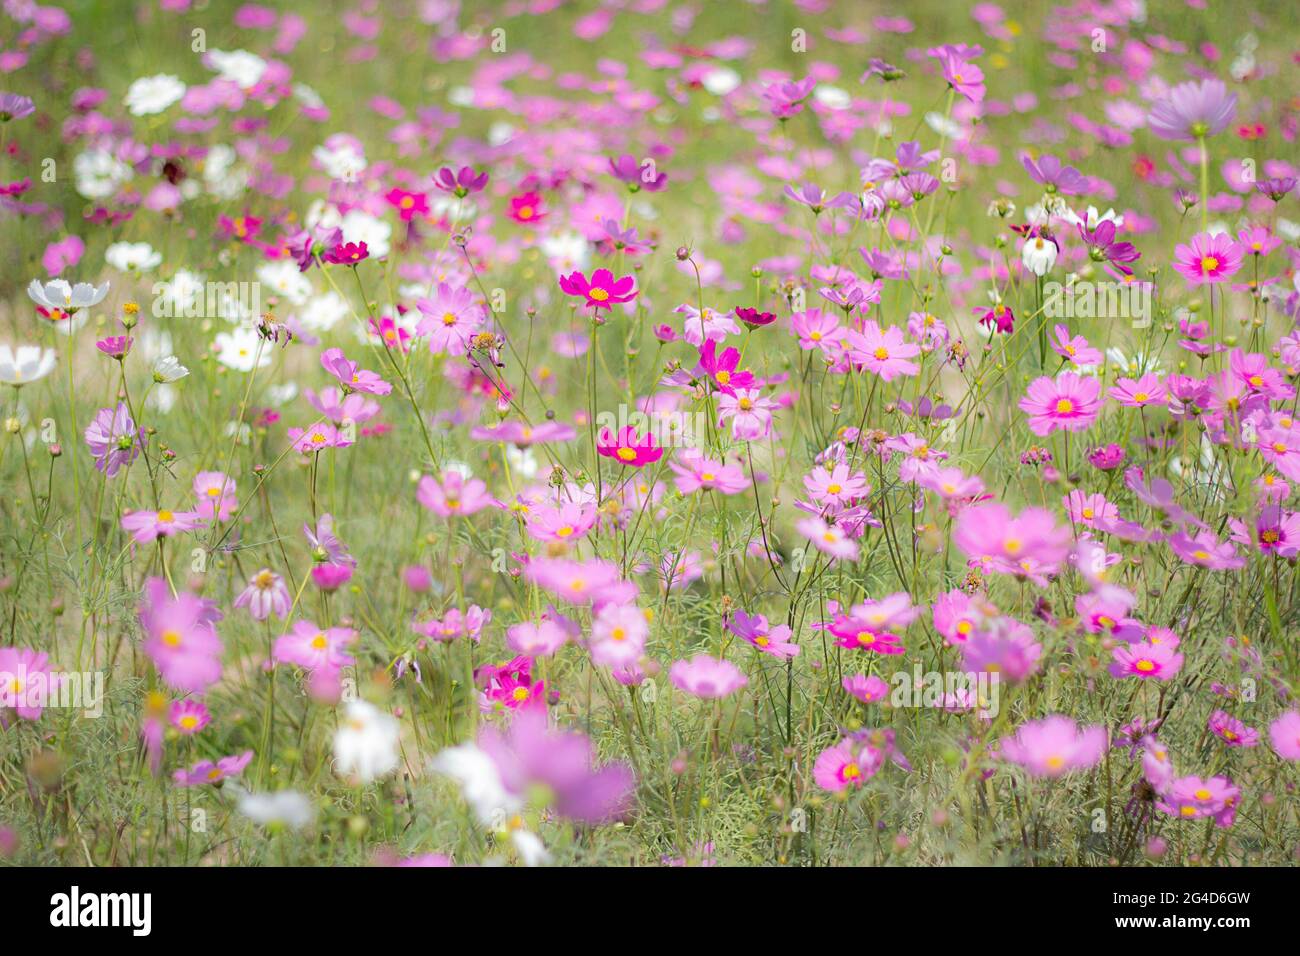 A field of pink cosmos flowers glistening in a dream, blur and solf focus Stock Photo